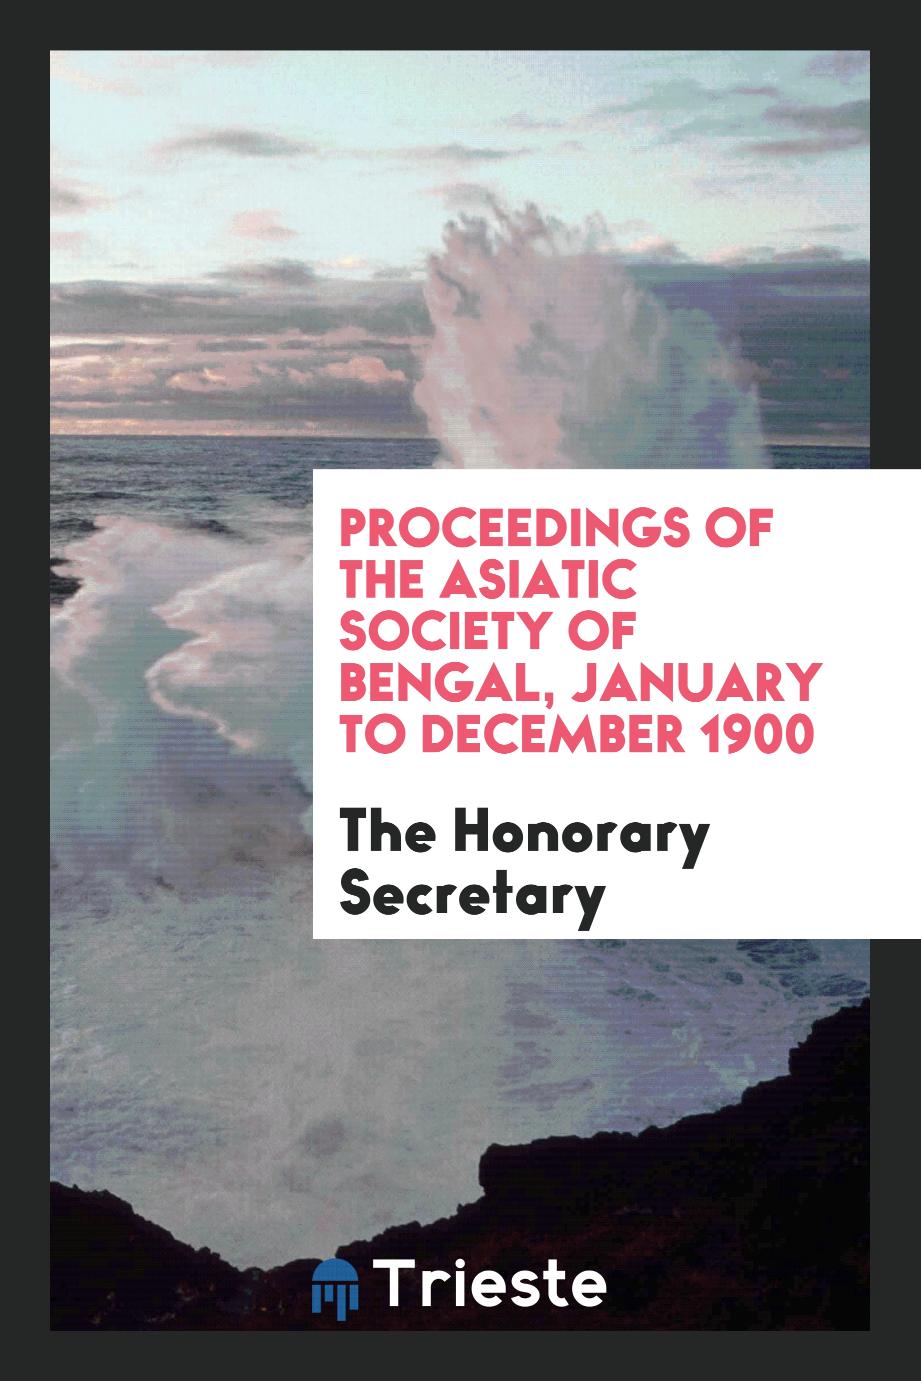 Proceedings of the Asiatic Society of Bengal, January to December 1900